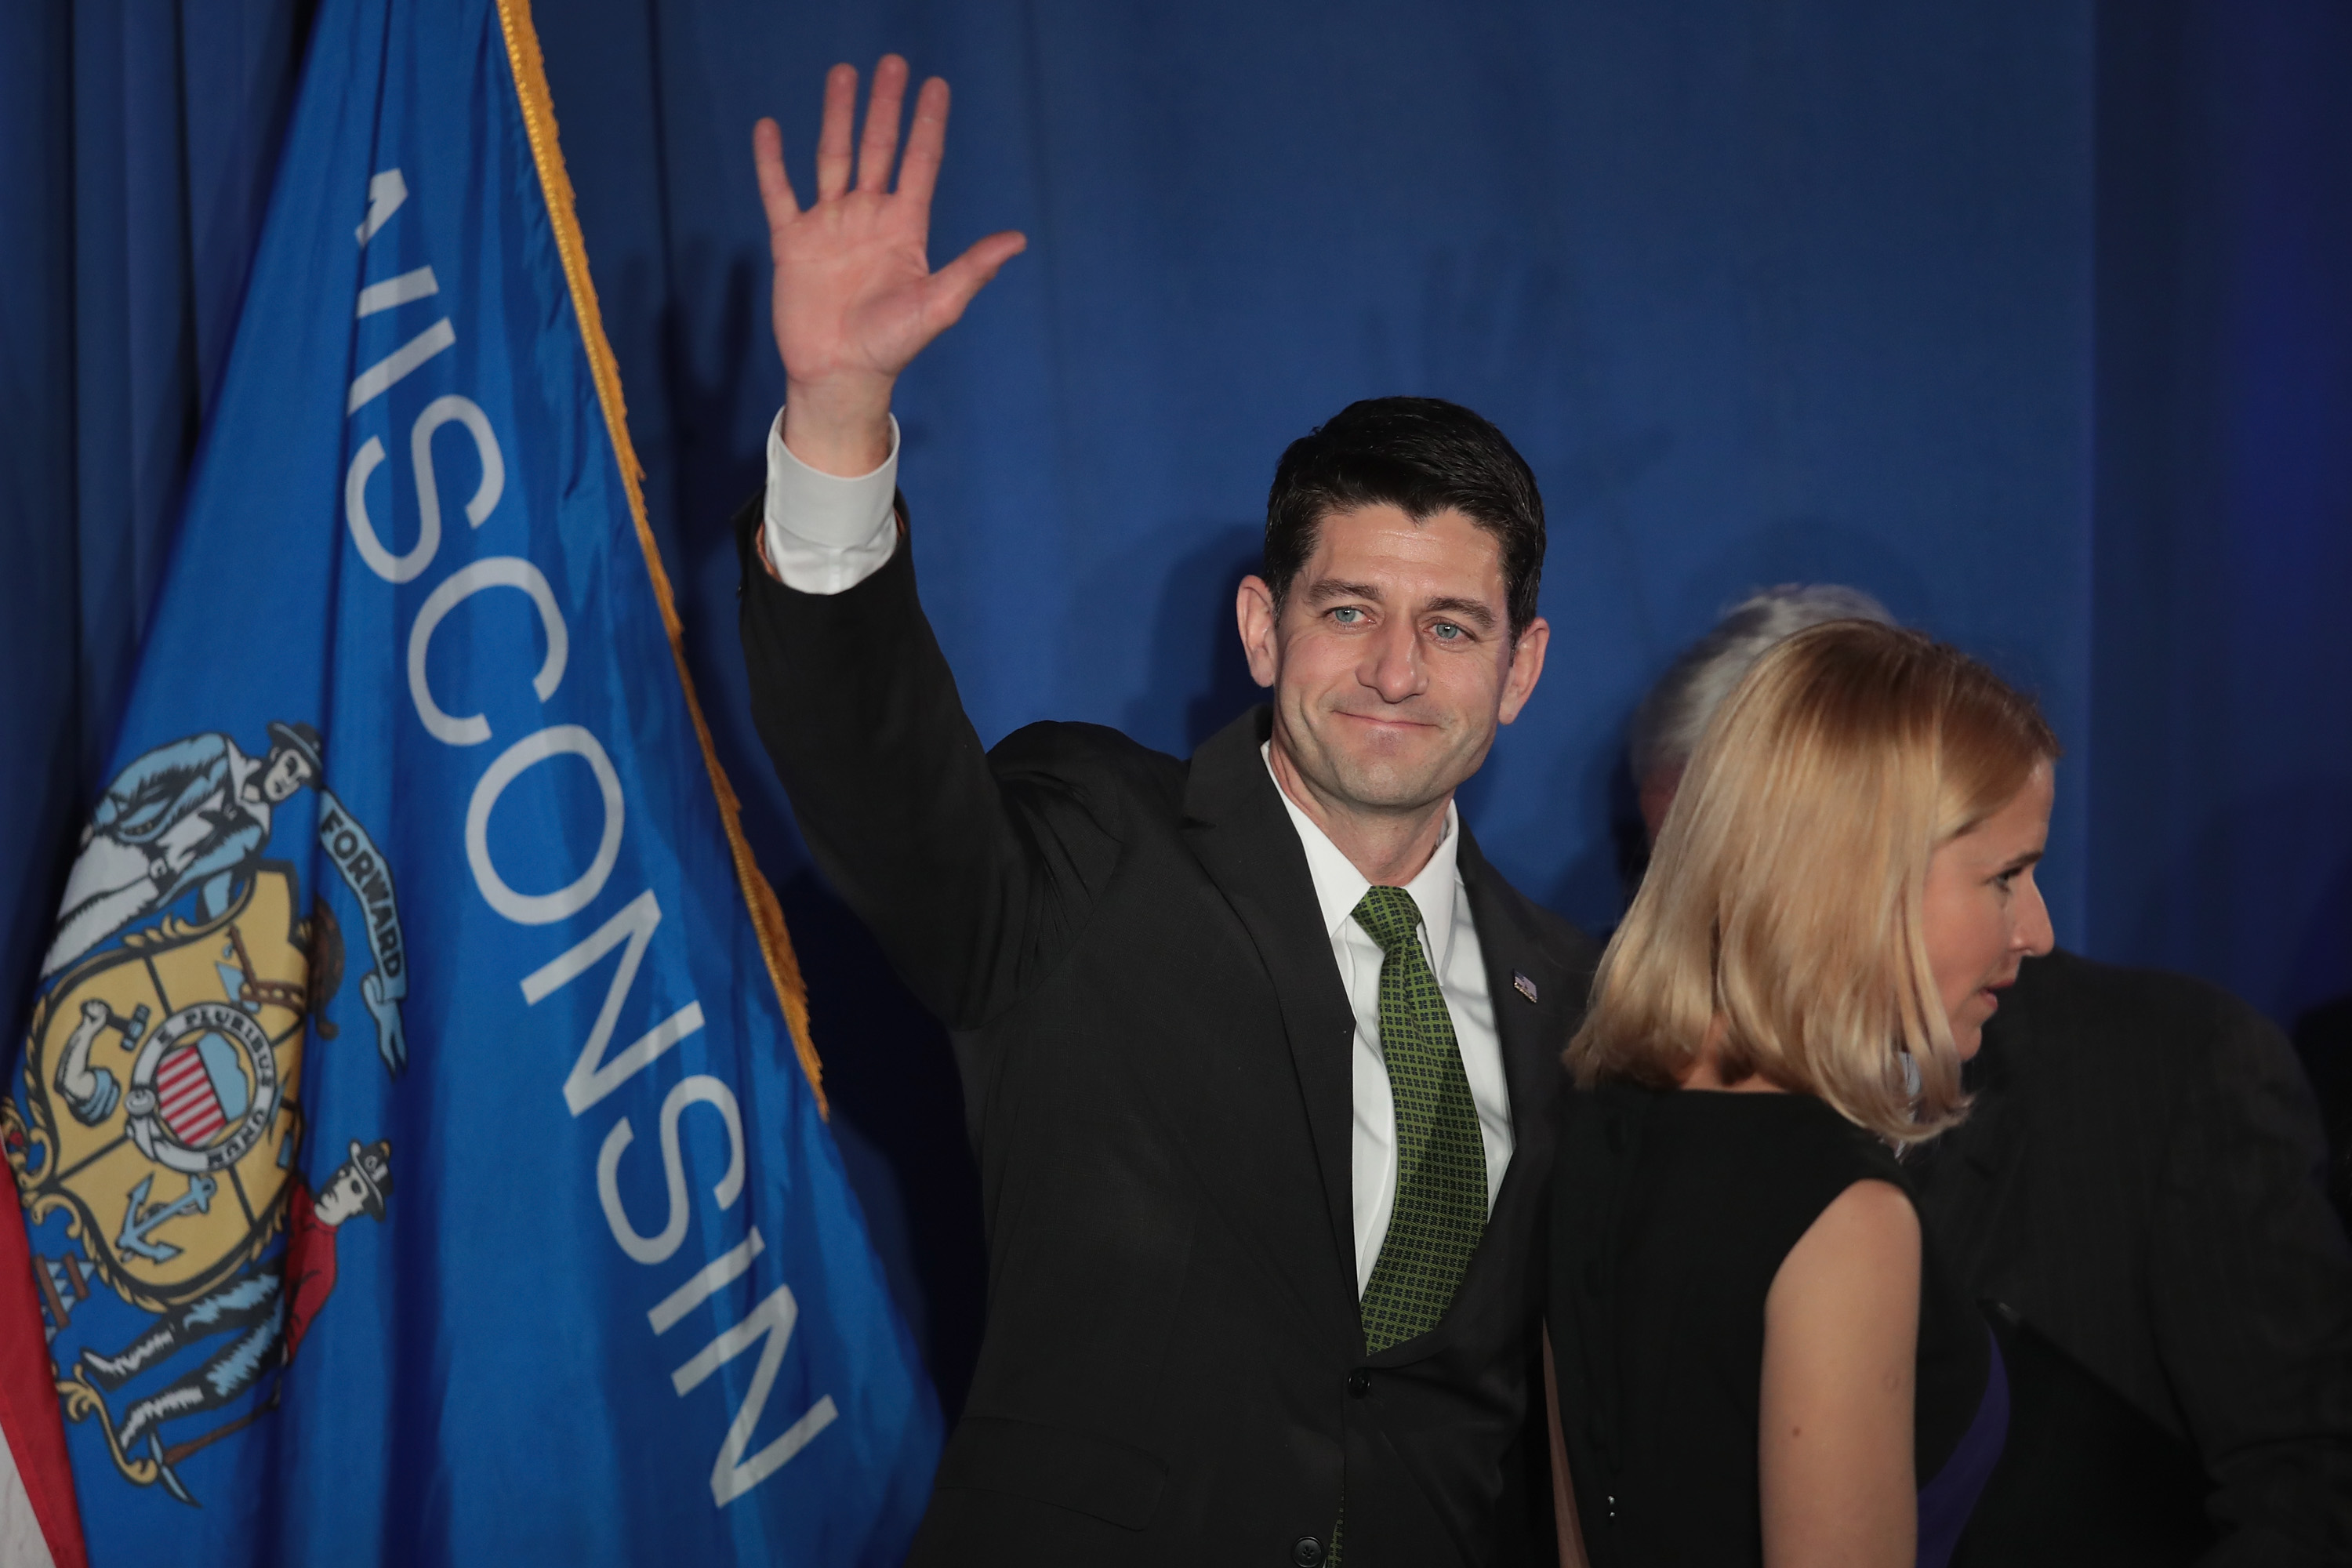 With his wife Janna by his side Speaker of the U.S. House of Representatives Paul Ryan (R-WI) greets supporters at an election-night rally on November 8, 2016 in Janesville, Wisconsin. Scott Olson&mdash;Getty Images (Scott Olson&mdash;Getty Images)